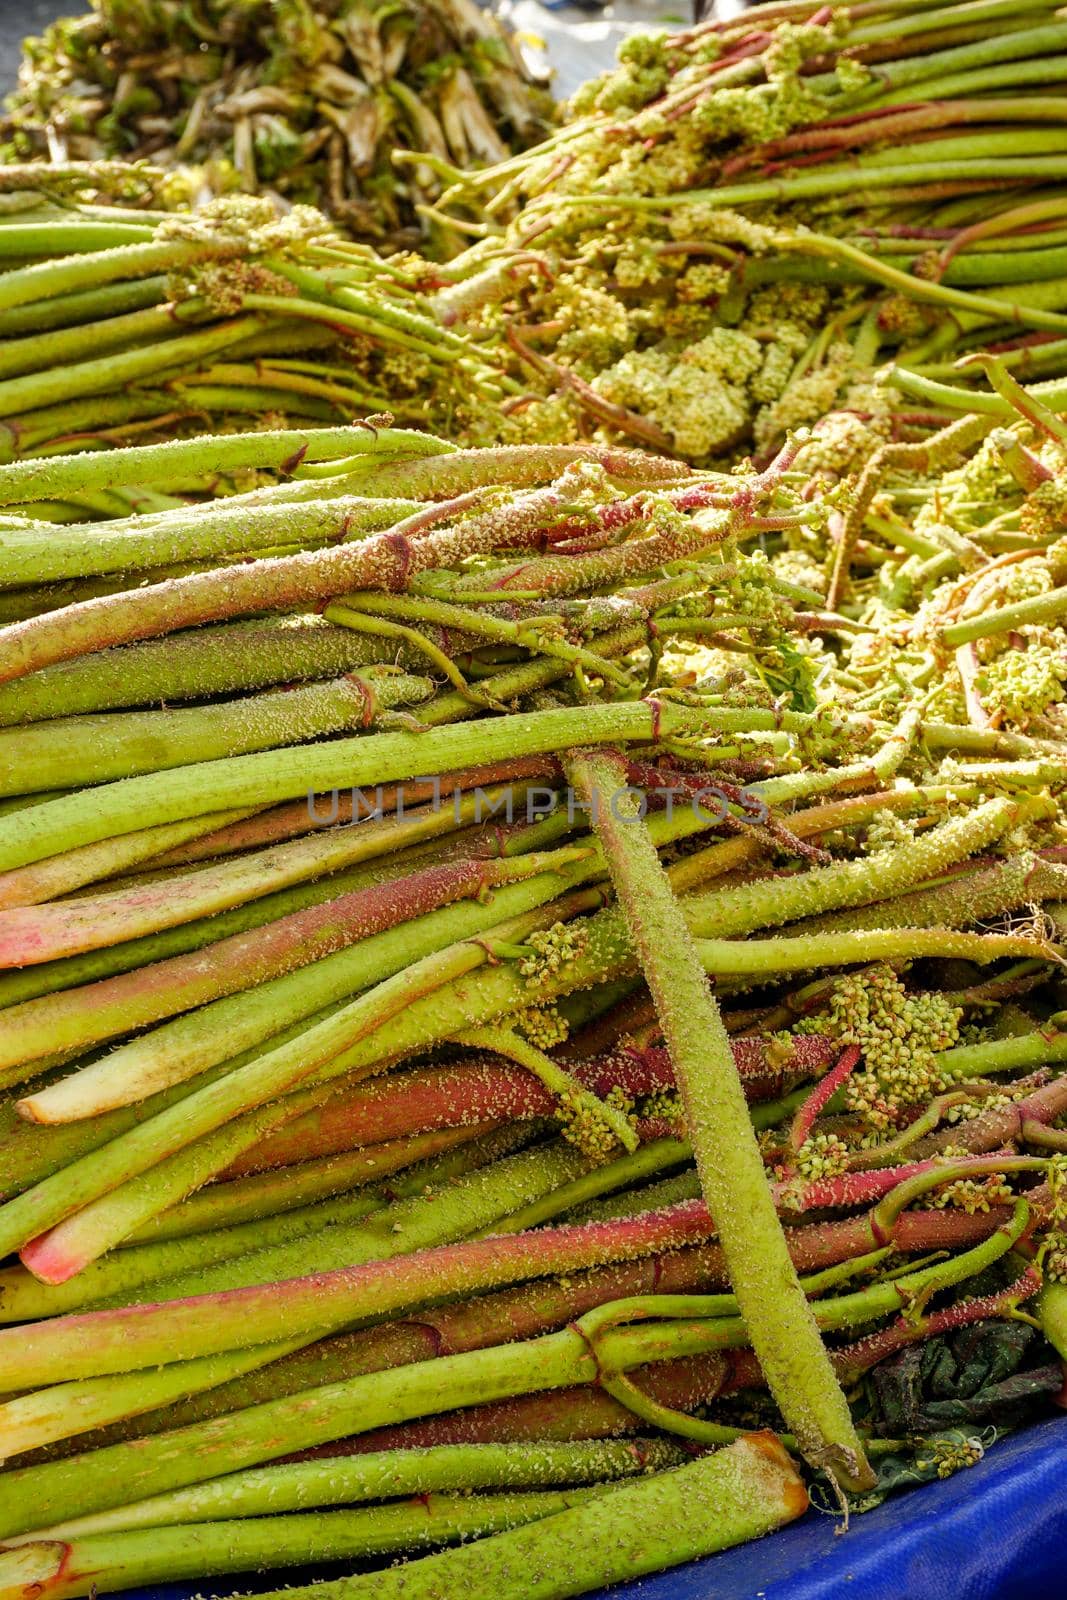 Rhubarb plant known as iskin in Turkish close up view